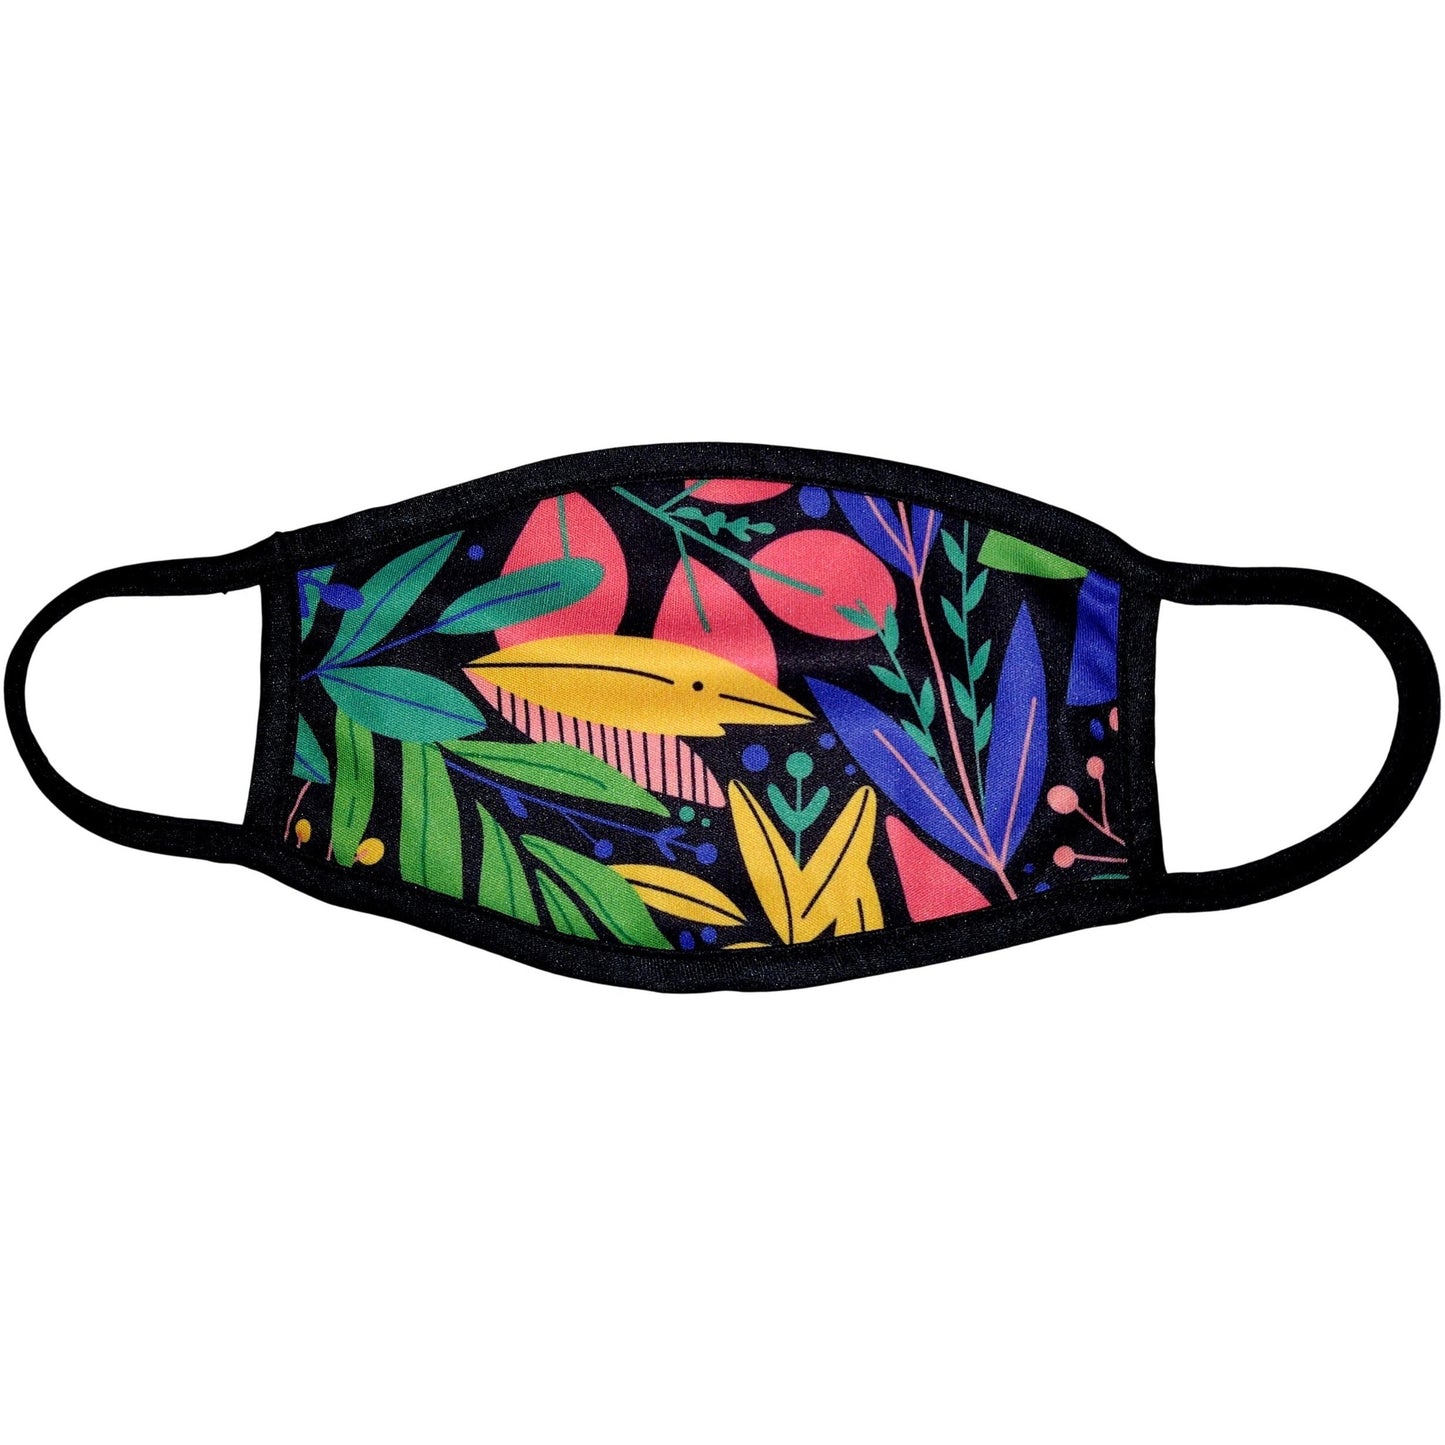 Neon Tropical Design Fashion Mask with PM2.5 Filter ~ Washable/Reusable